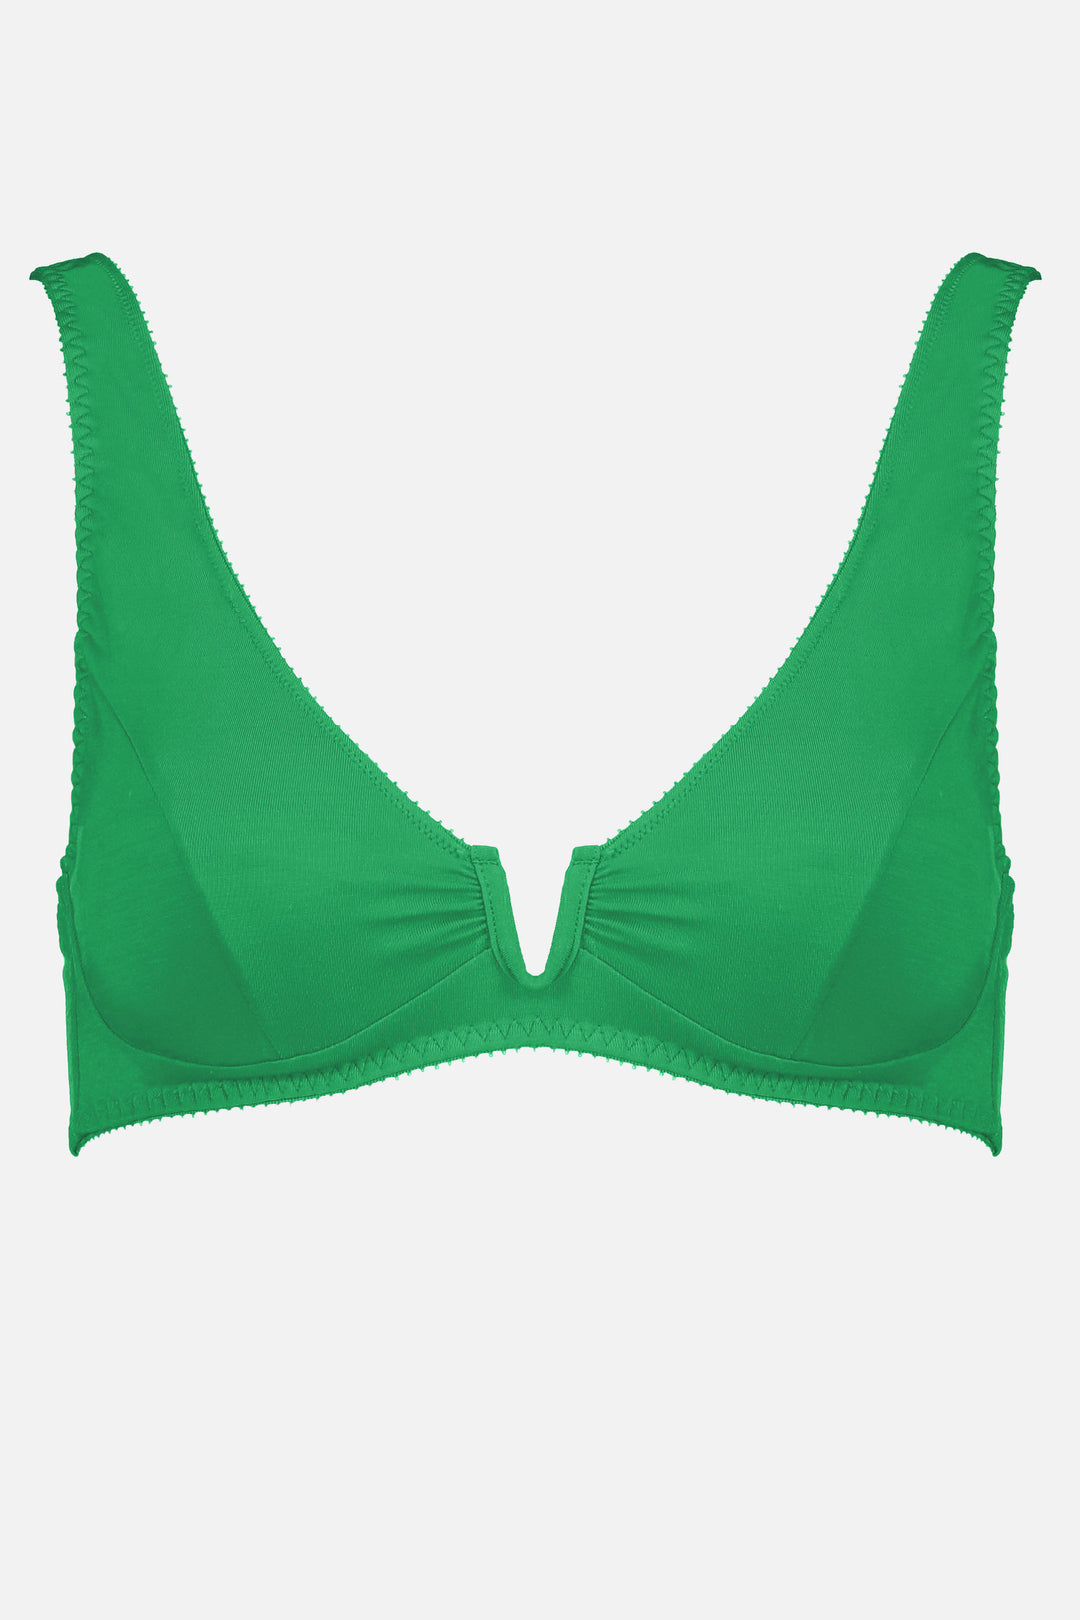 Videris Lingerie Sarah underwire free soft cup bra in poise green TENCEL™ with a scooped plunge cup and front U wire